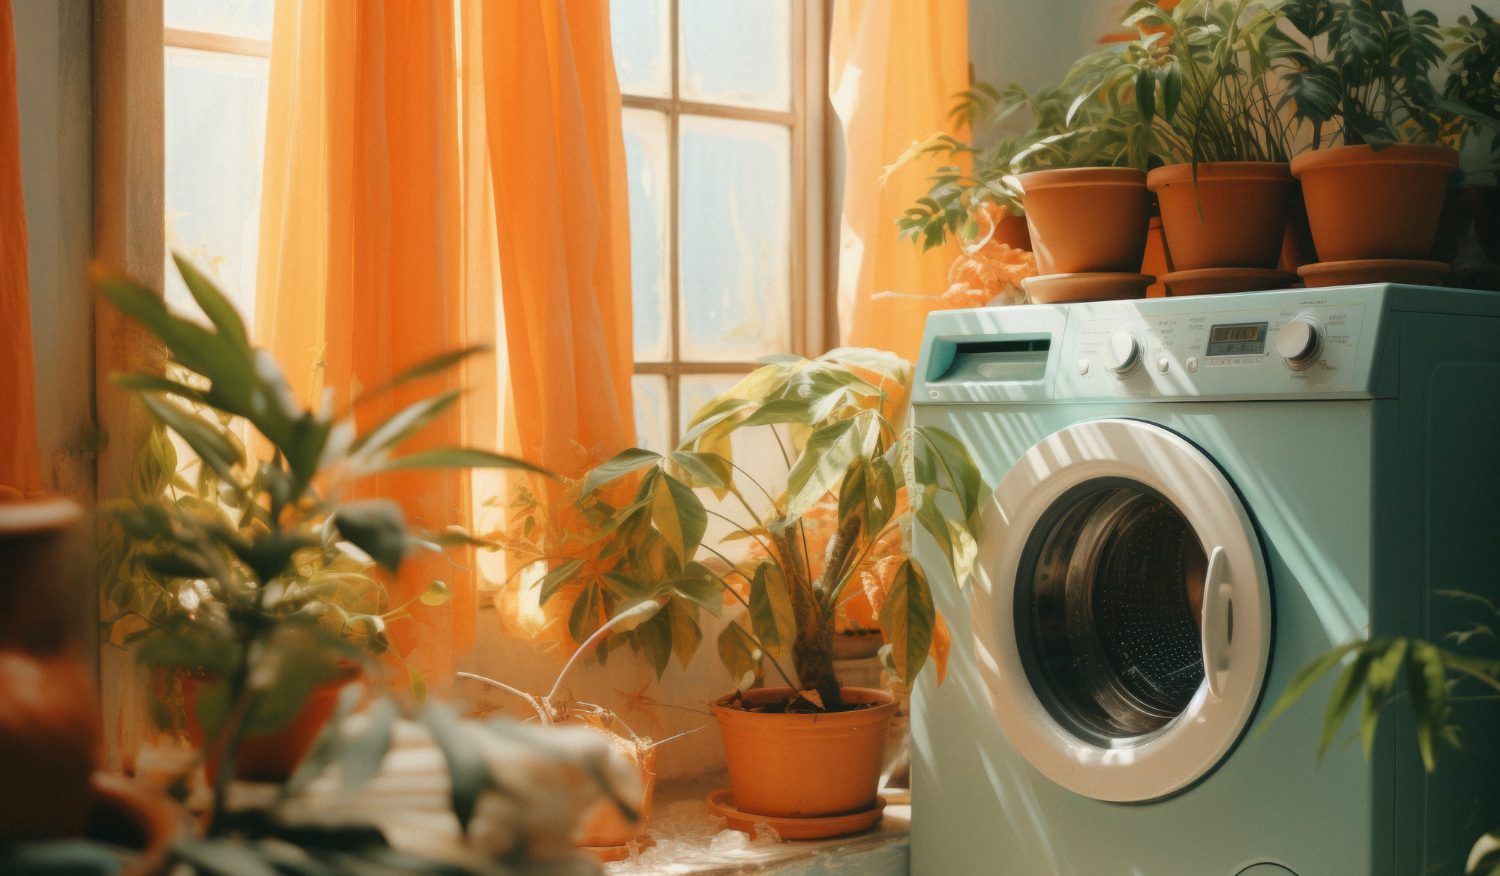 Appliance Repair for Eco-Friendly Homes: Sustainable Solutions